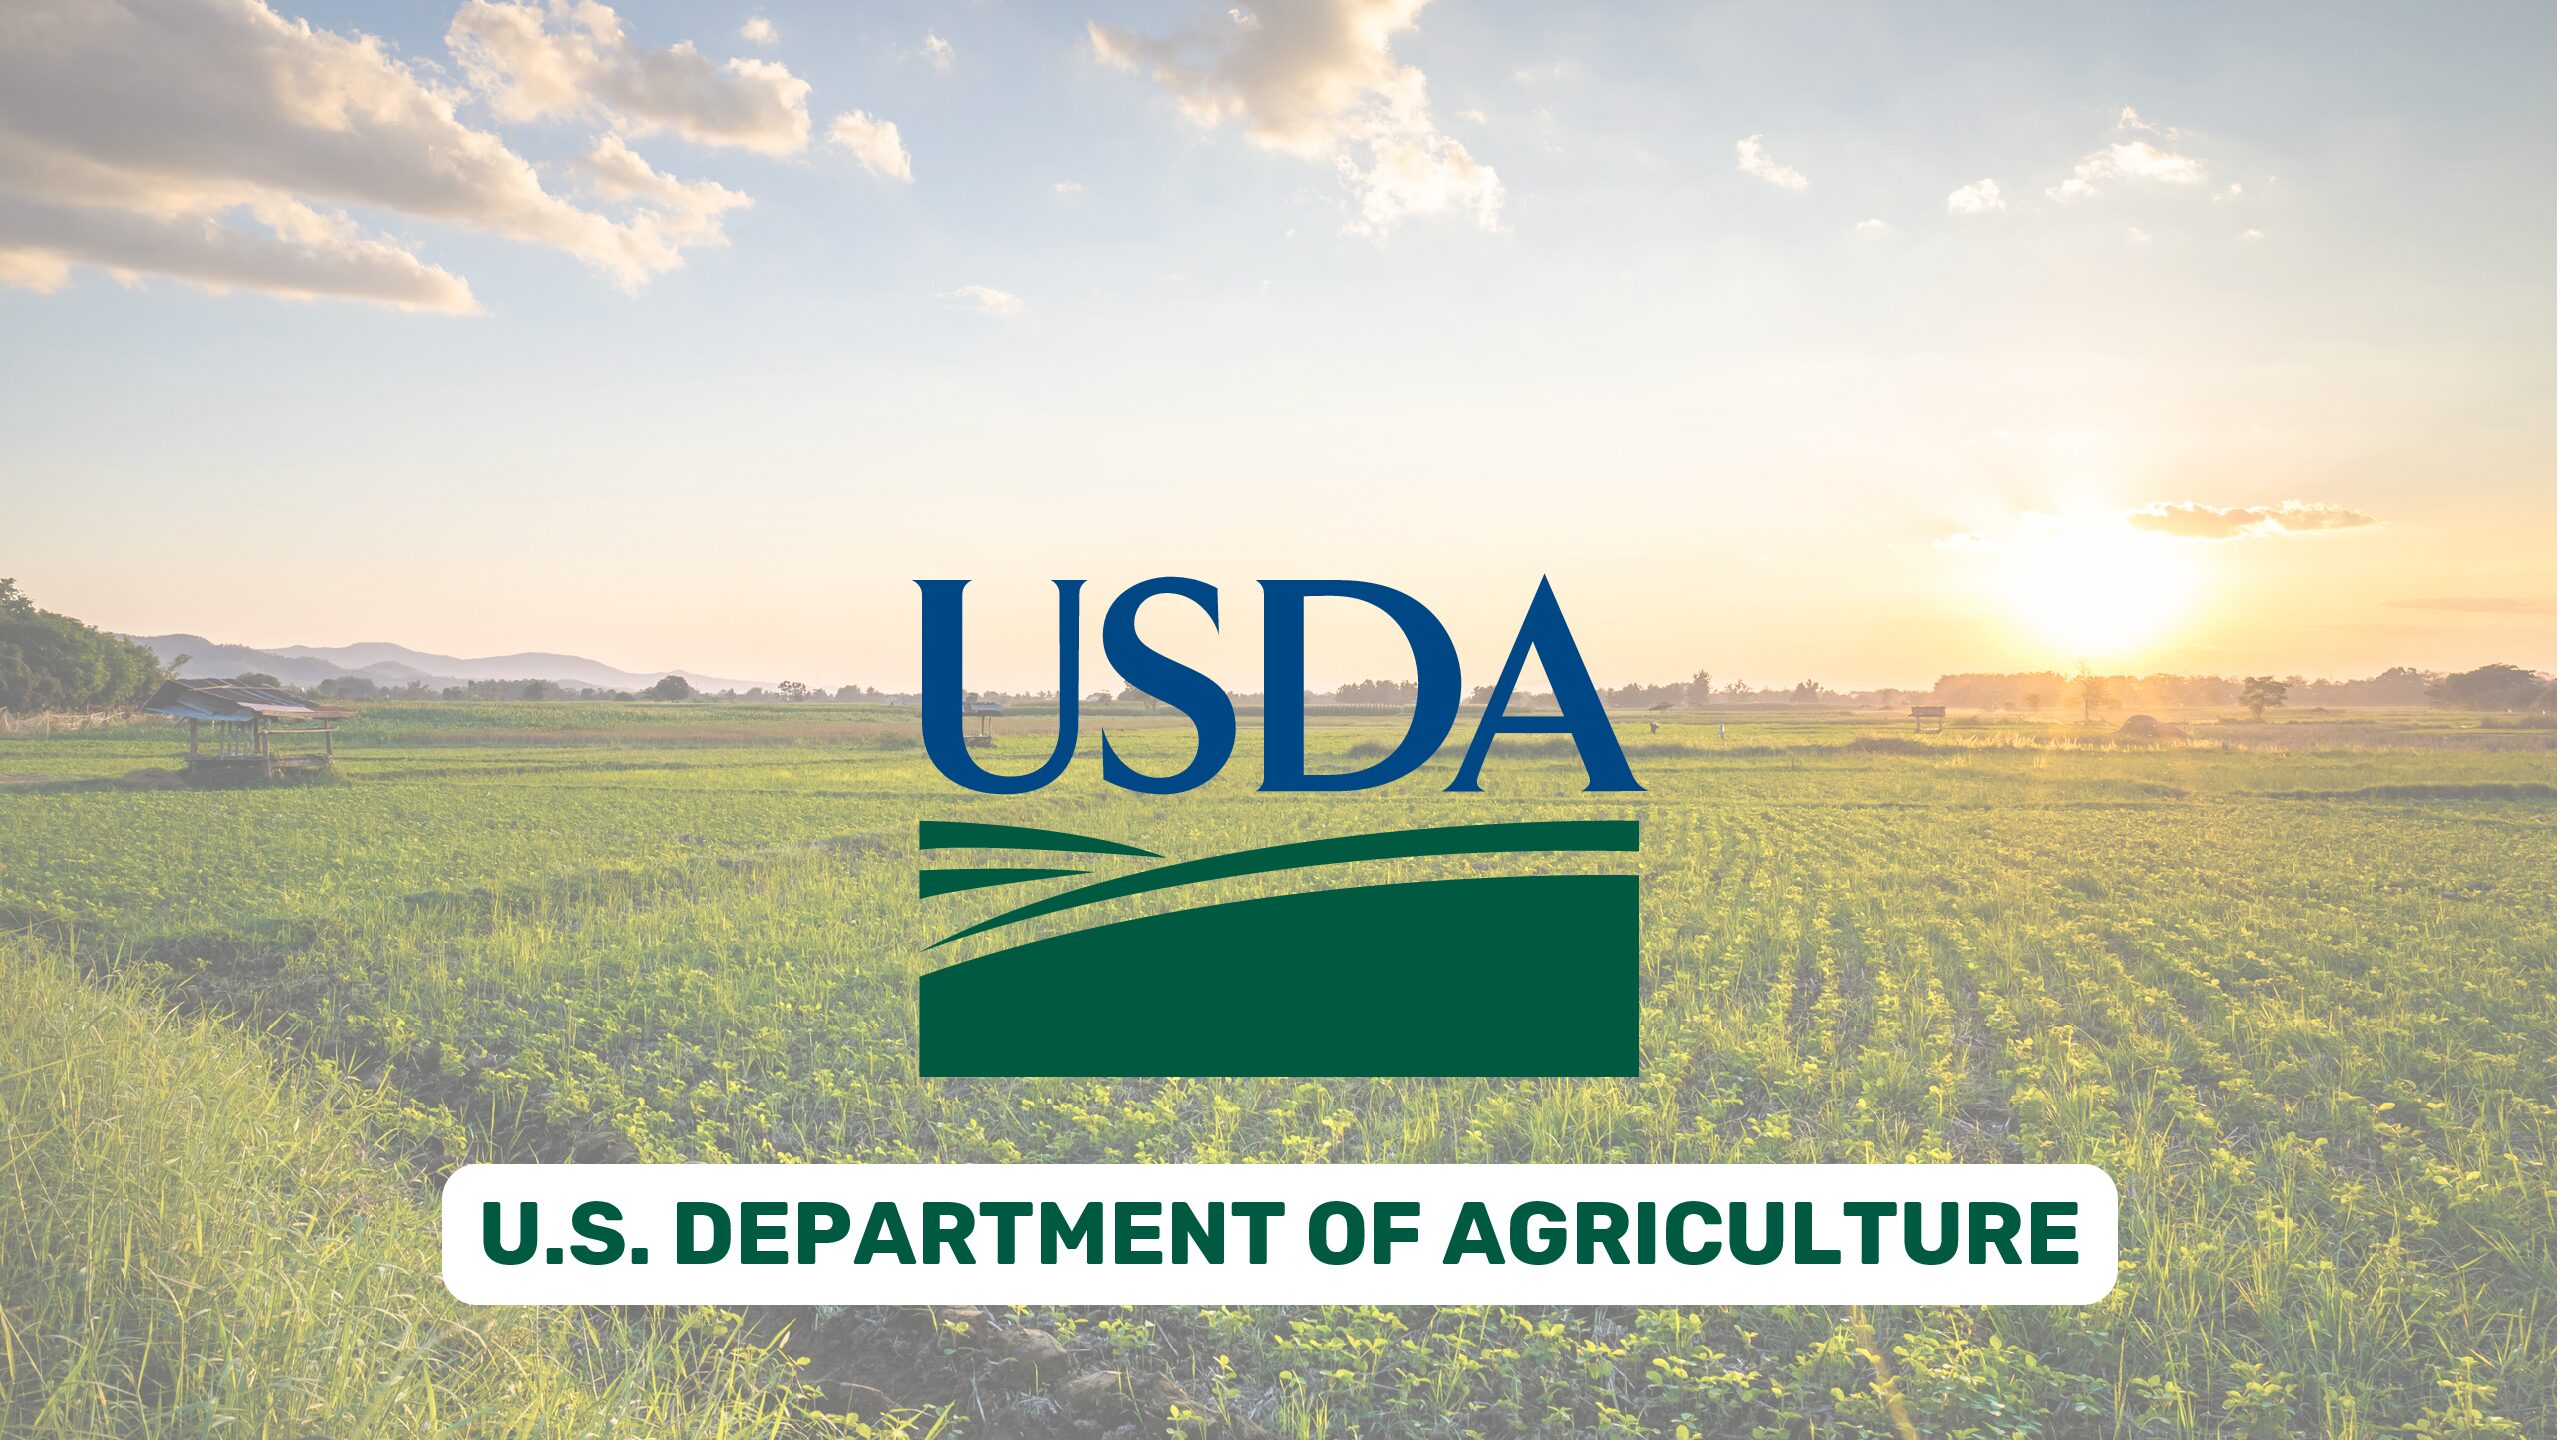 USDA | NRCS California Launches First Urban and Small-Scale Farms Subcommittee